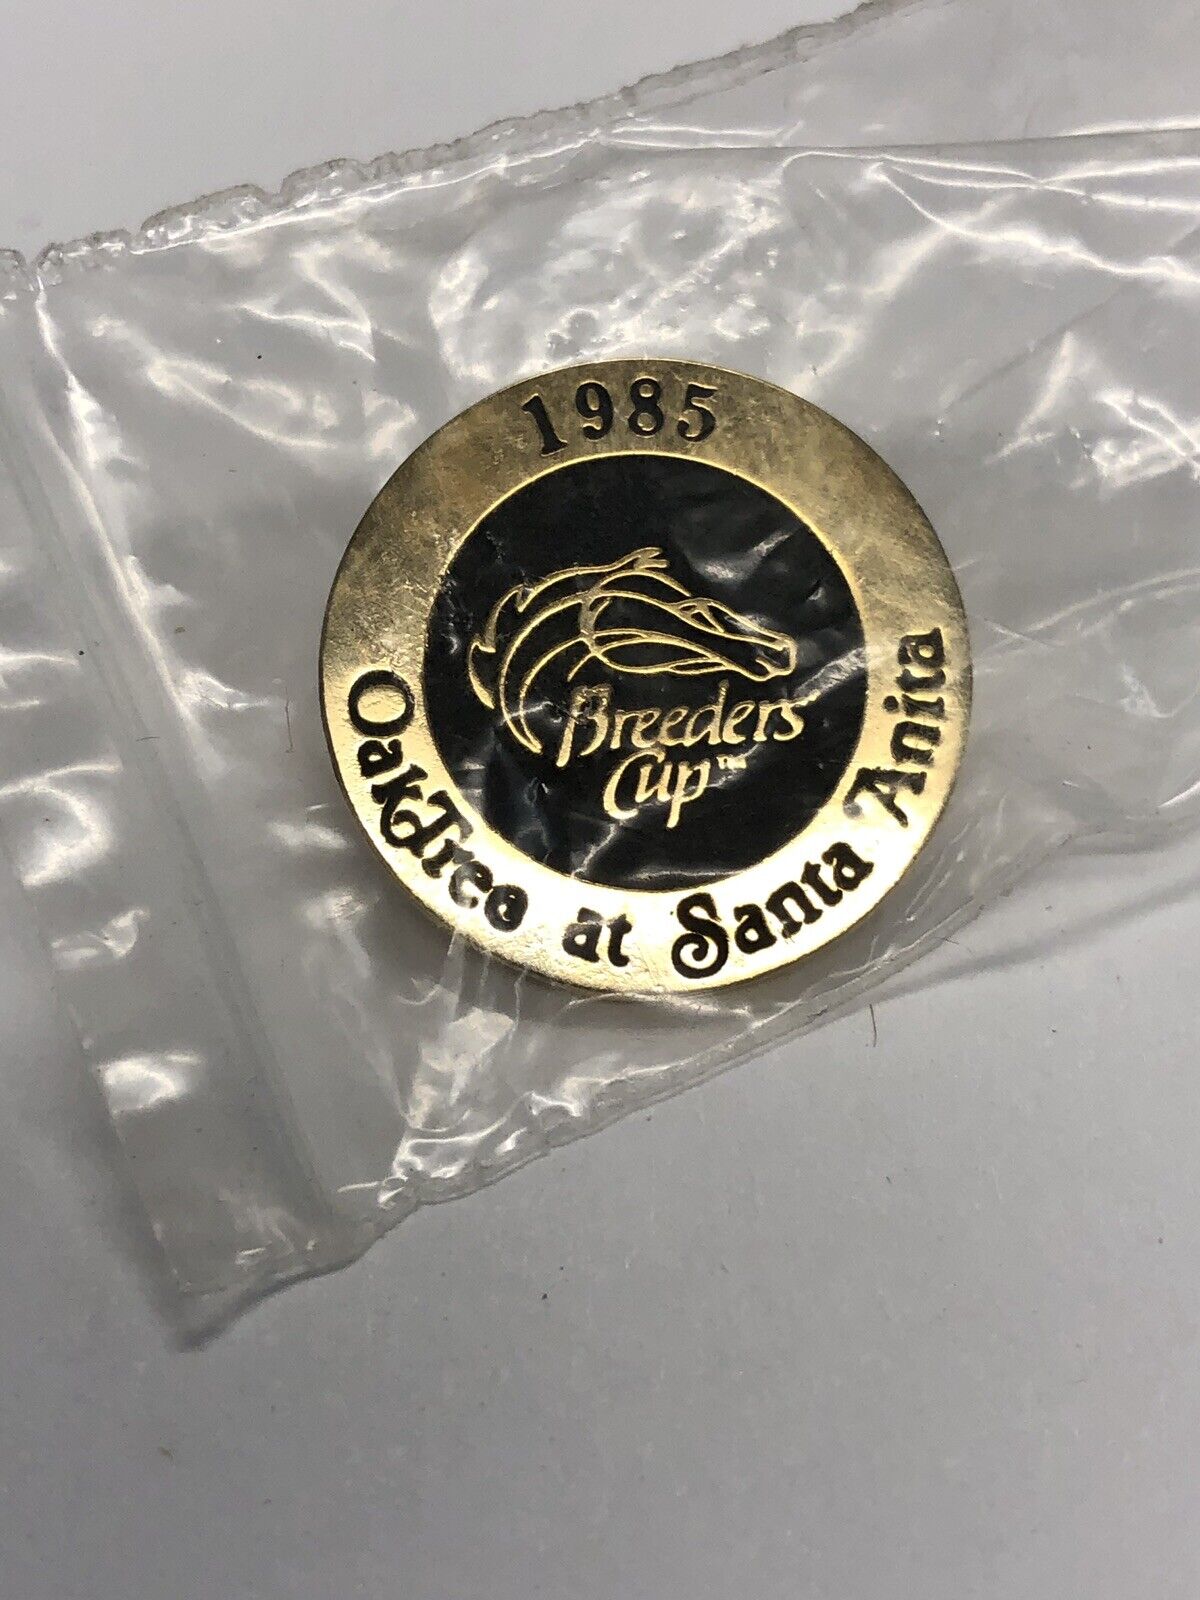 One 1985 Oaktree at Santa Anita Breeders Cup Lapel Pin in Brand New Condition